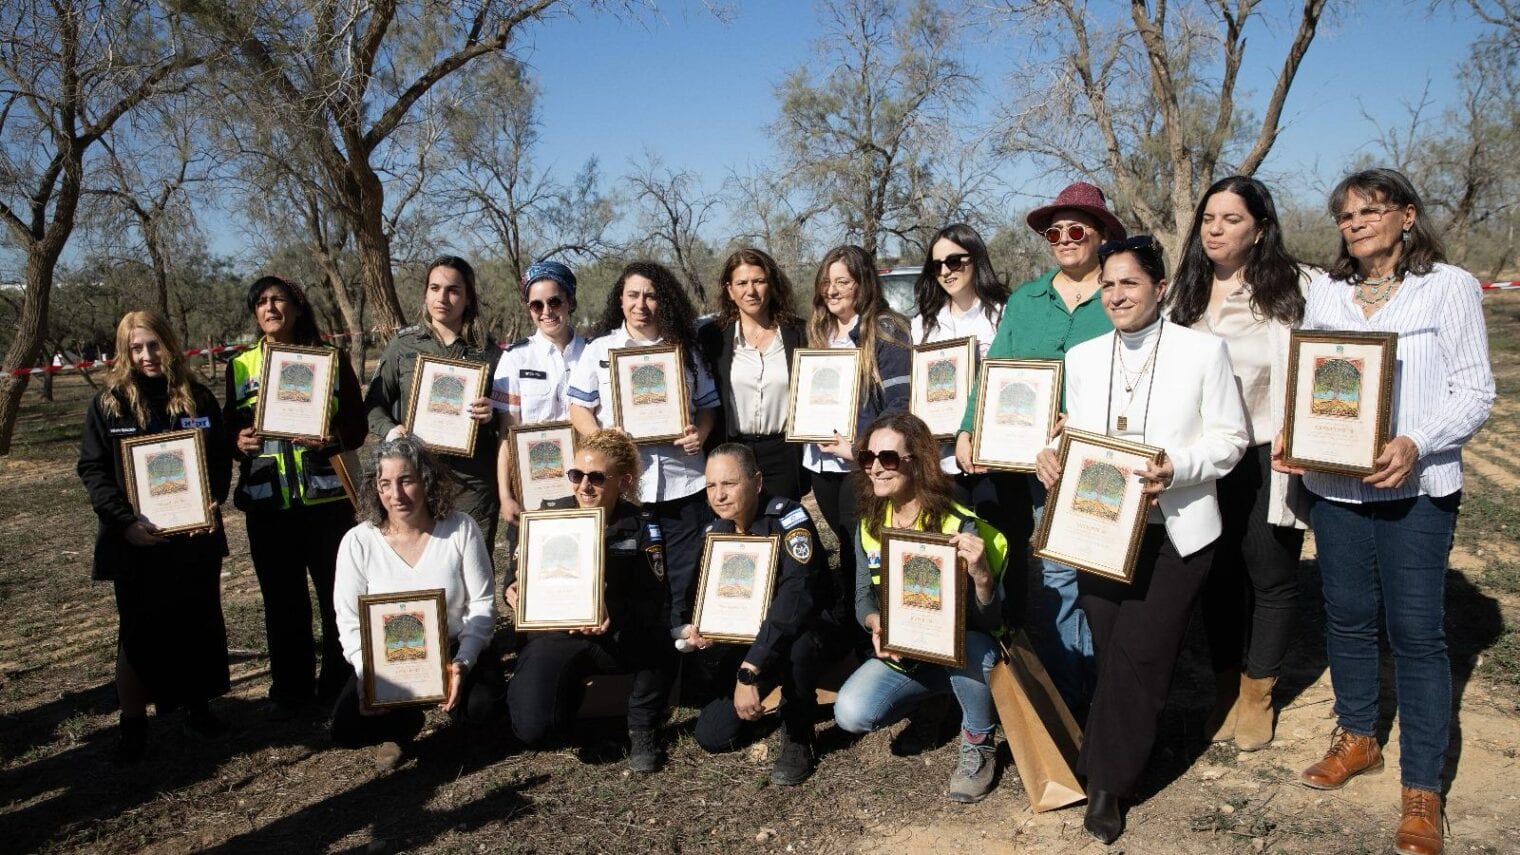 The women honored at the Path of Heroines inauguration ceremony. Photo by Alexander Kolomoisky/KKL-JNF